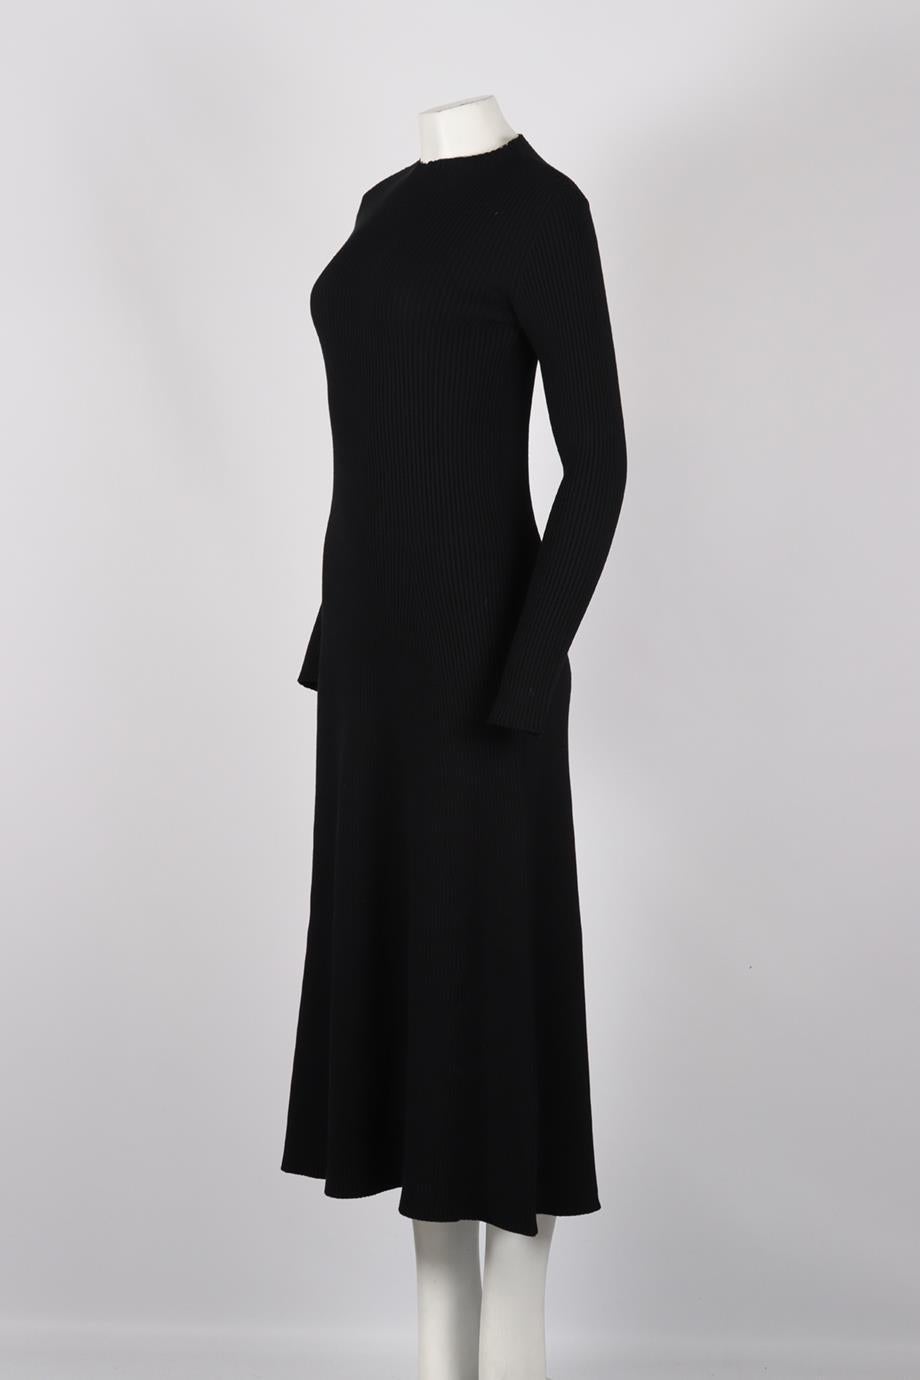 Prada Ribbed Wool Blend Midi Dress Large In Excellent Condition In London, GB